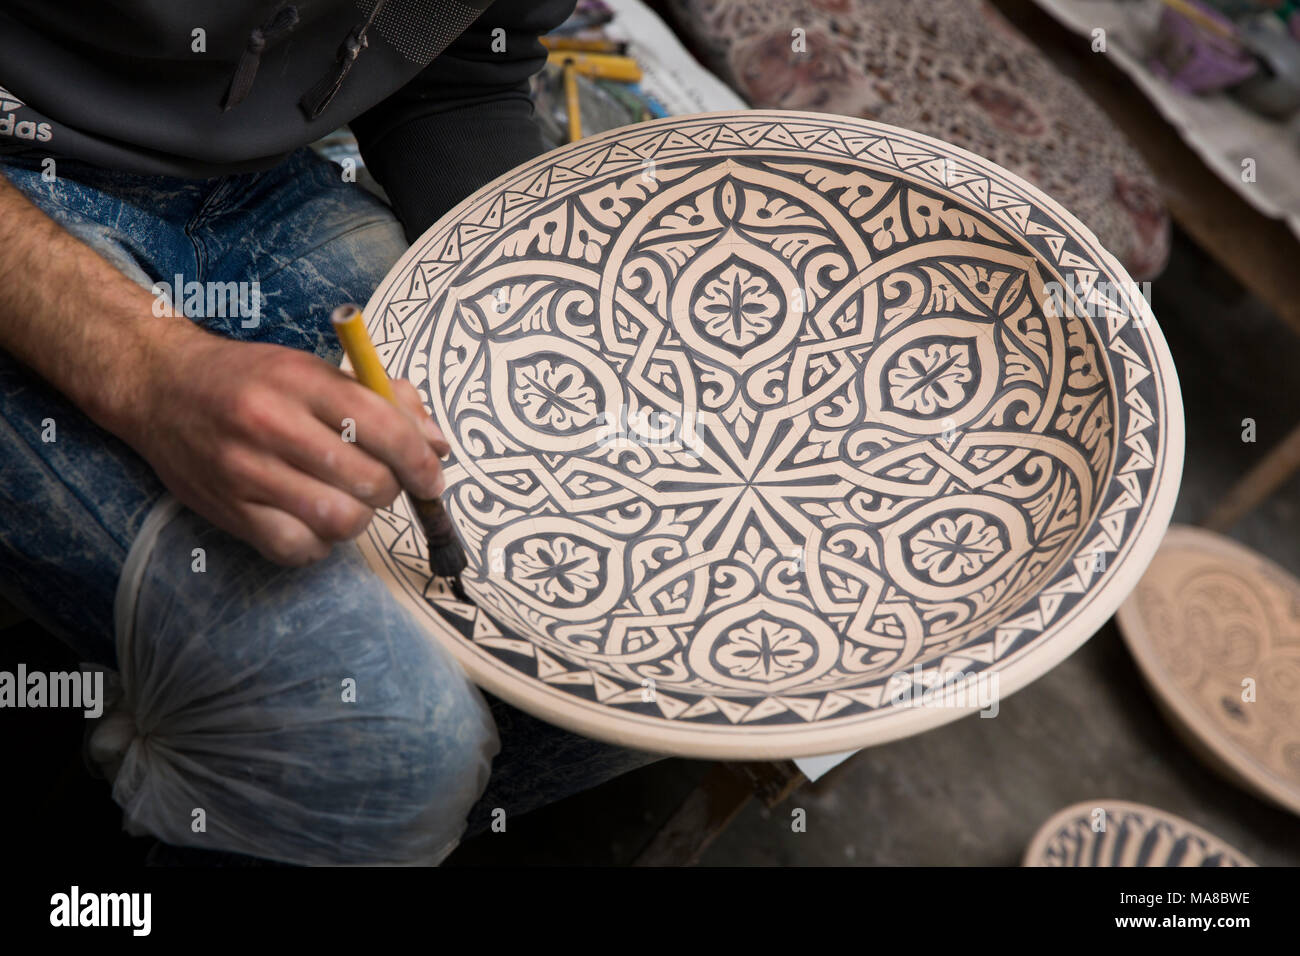 Morocco, Fes, Quartier des Potiers, Pottery, worker hand decorating geometric patterned dish Stock Photo